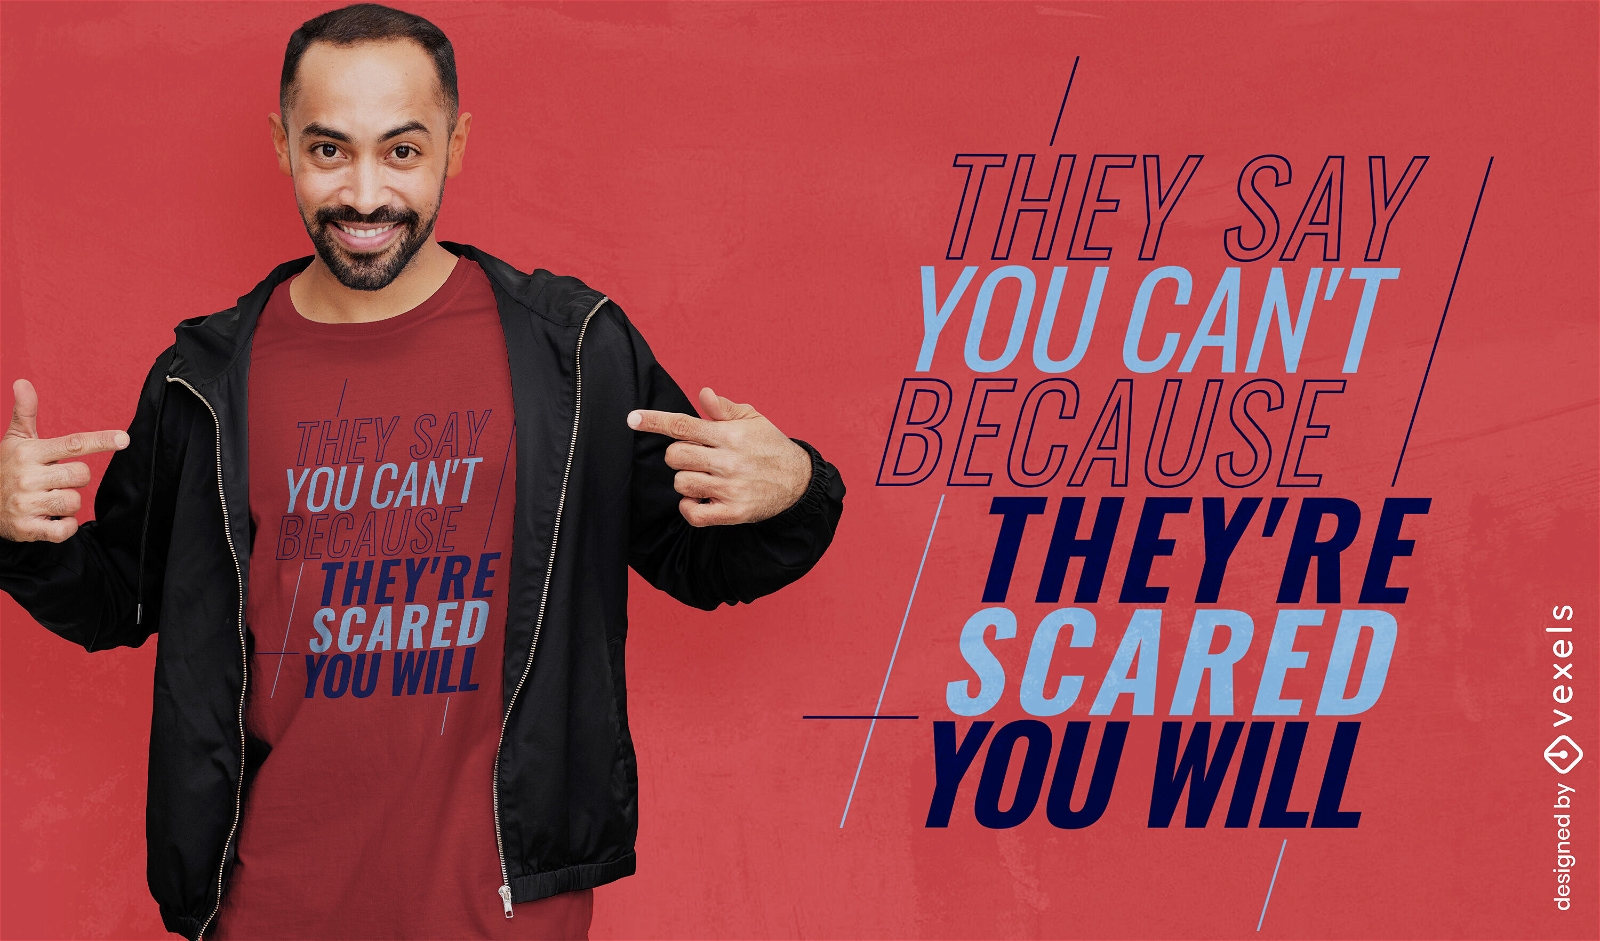 Working motivational quote t-shirt design